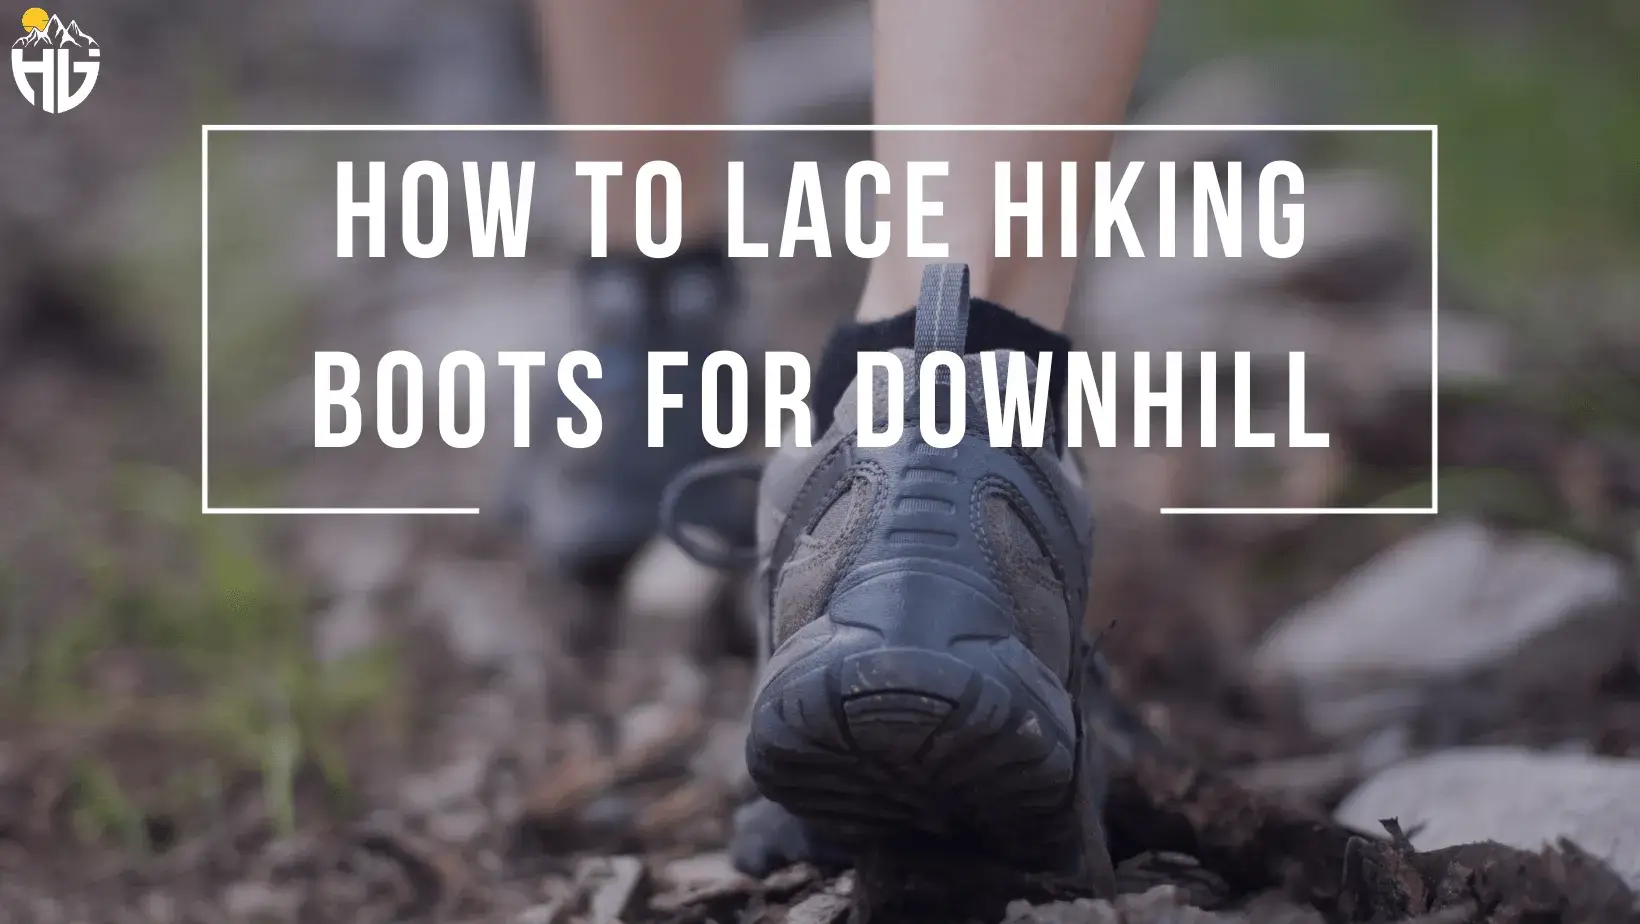 How to lace hiking boots for downhill